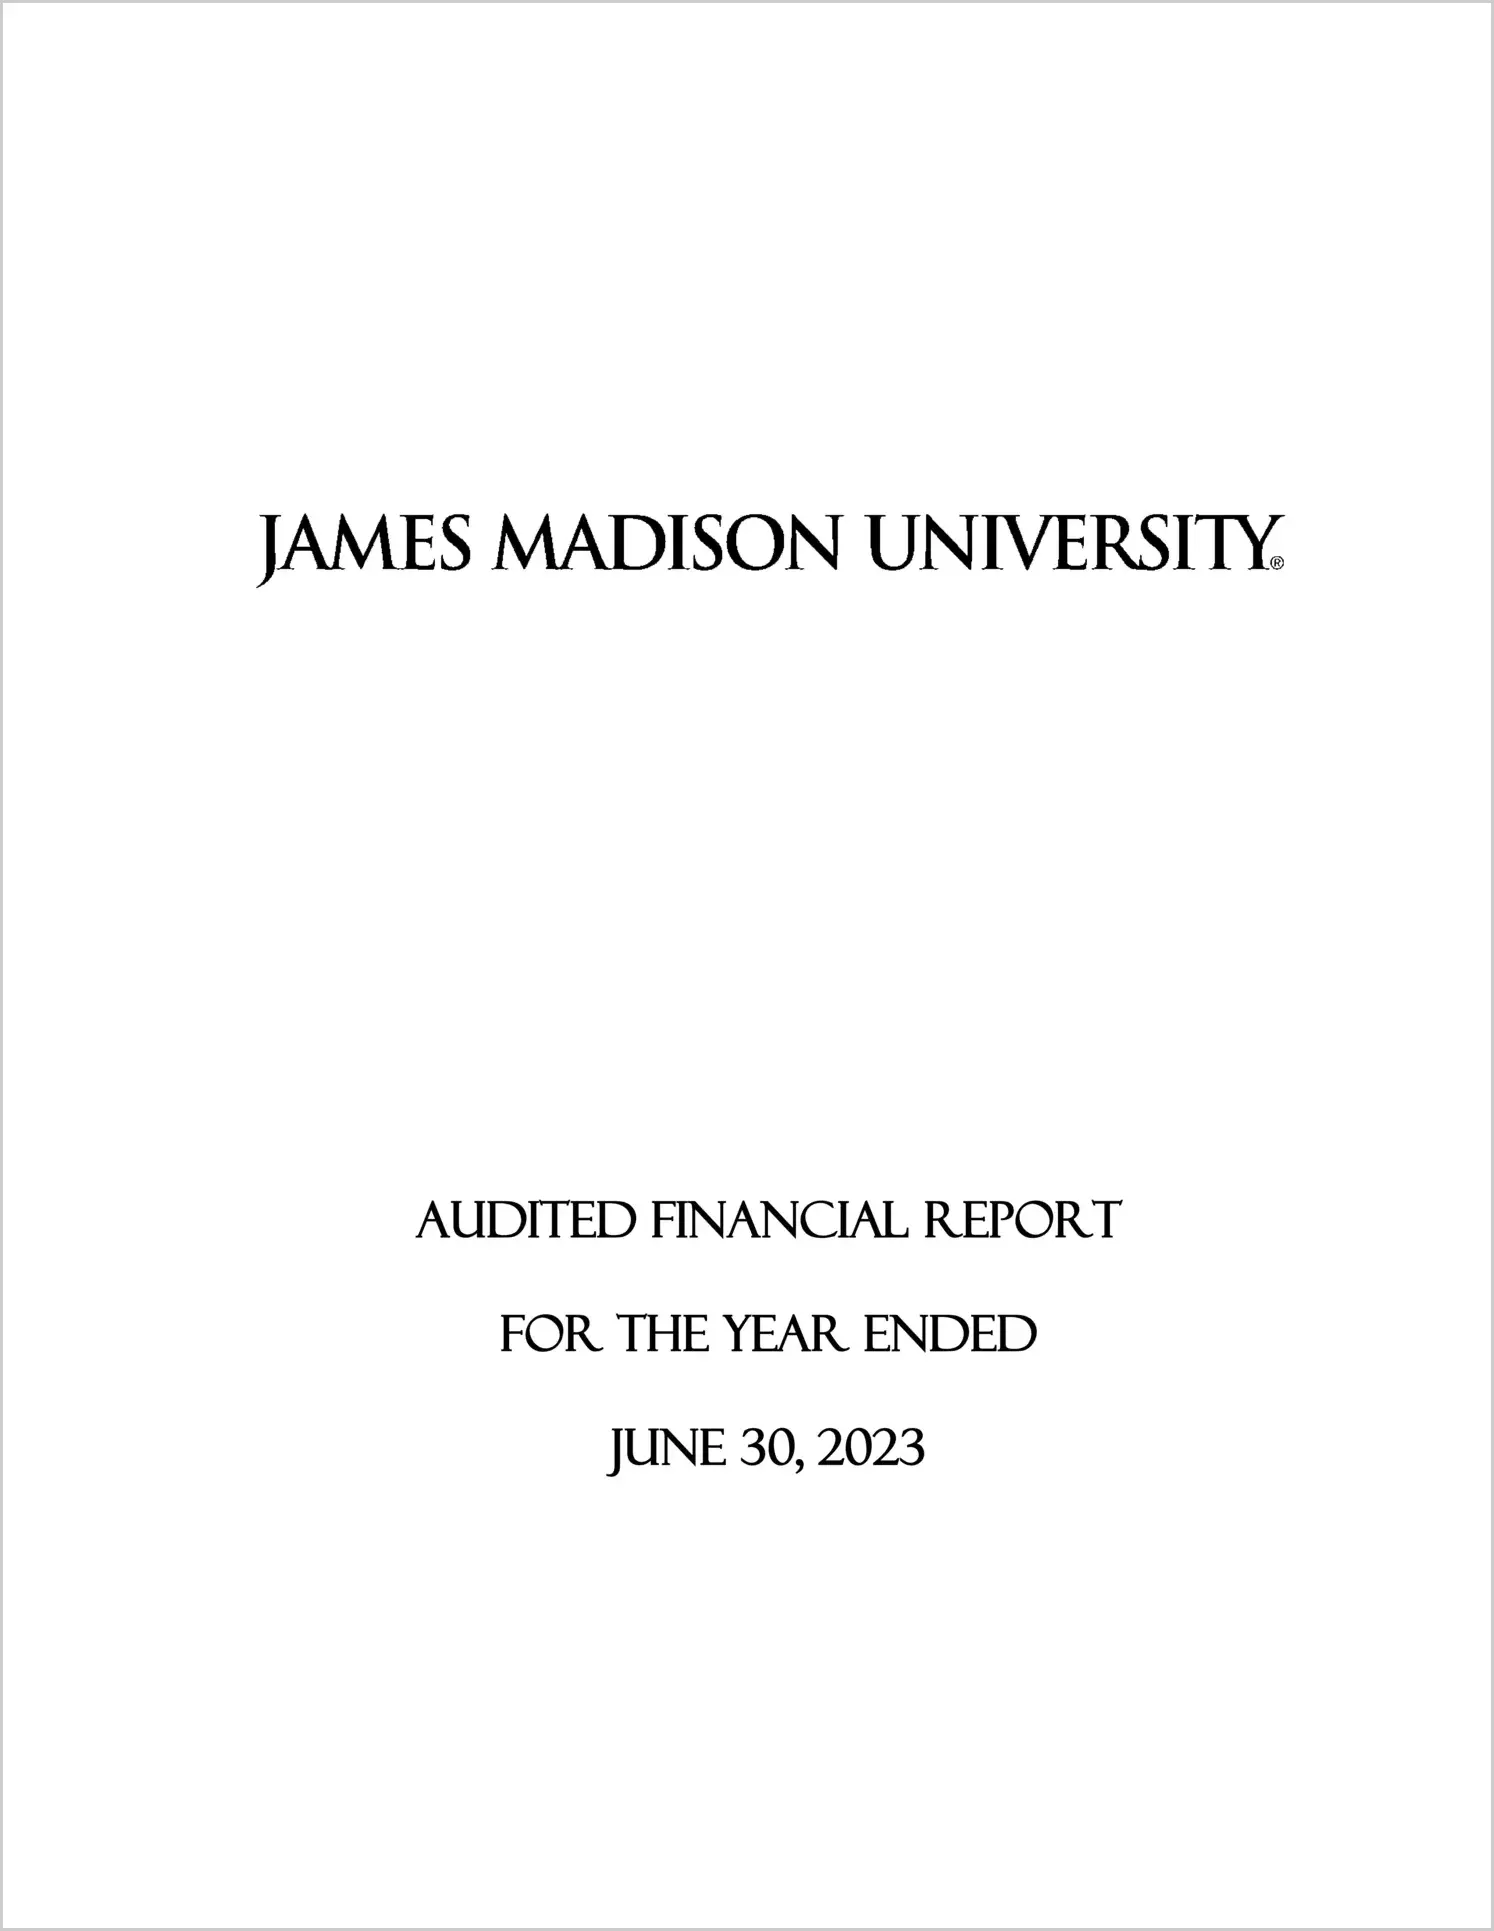 James Madison University Financial Statements for the year ended June 30, 2023